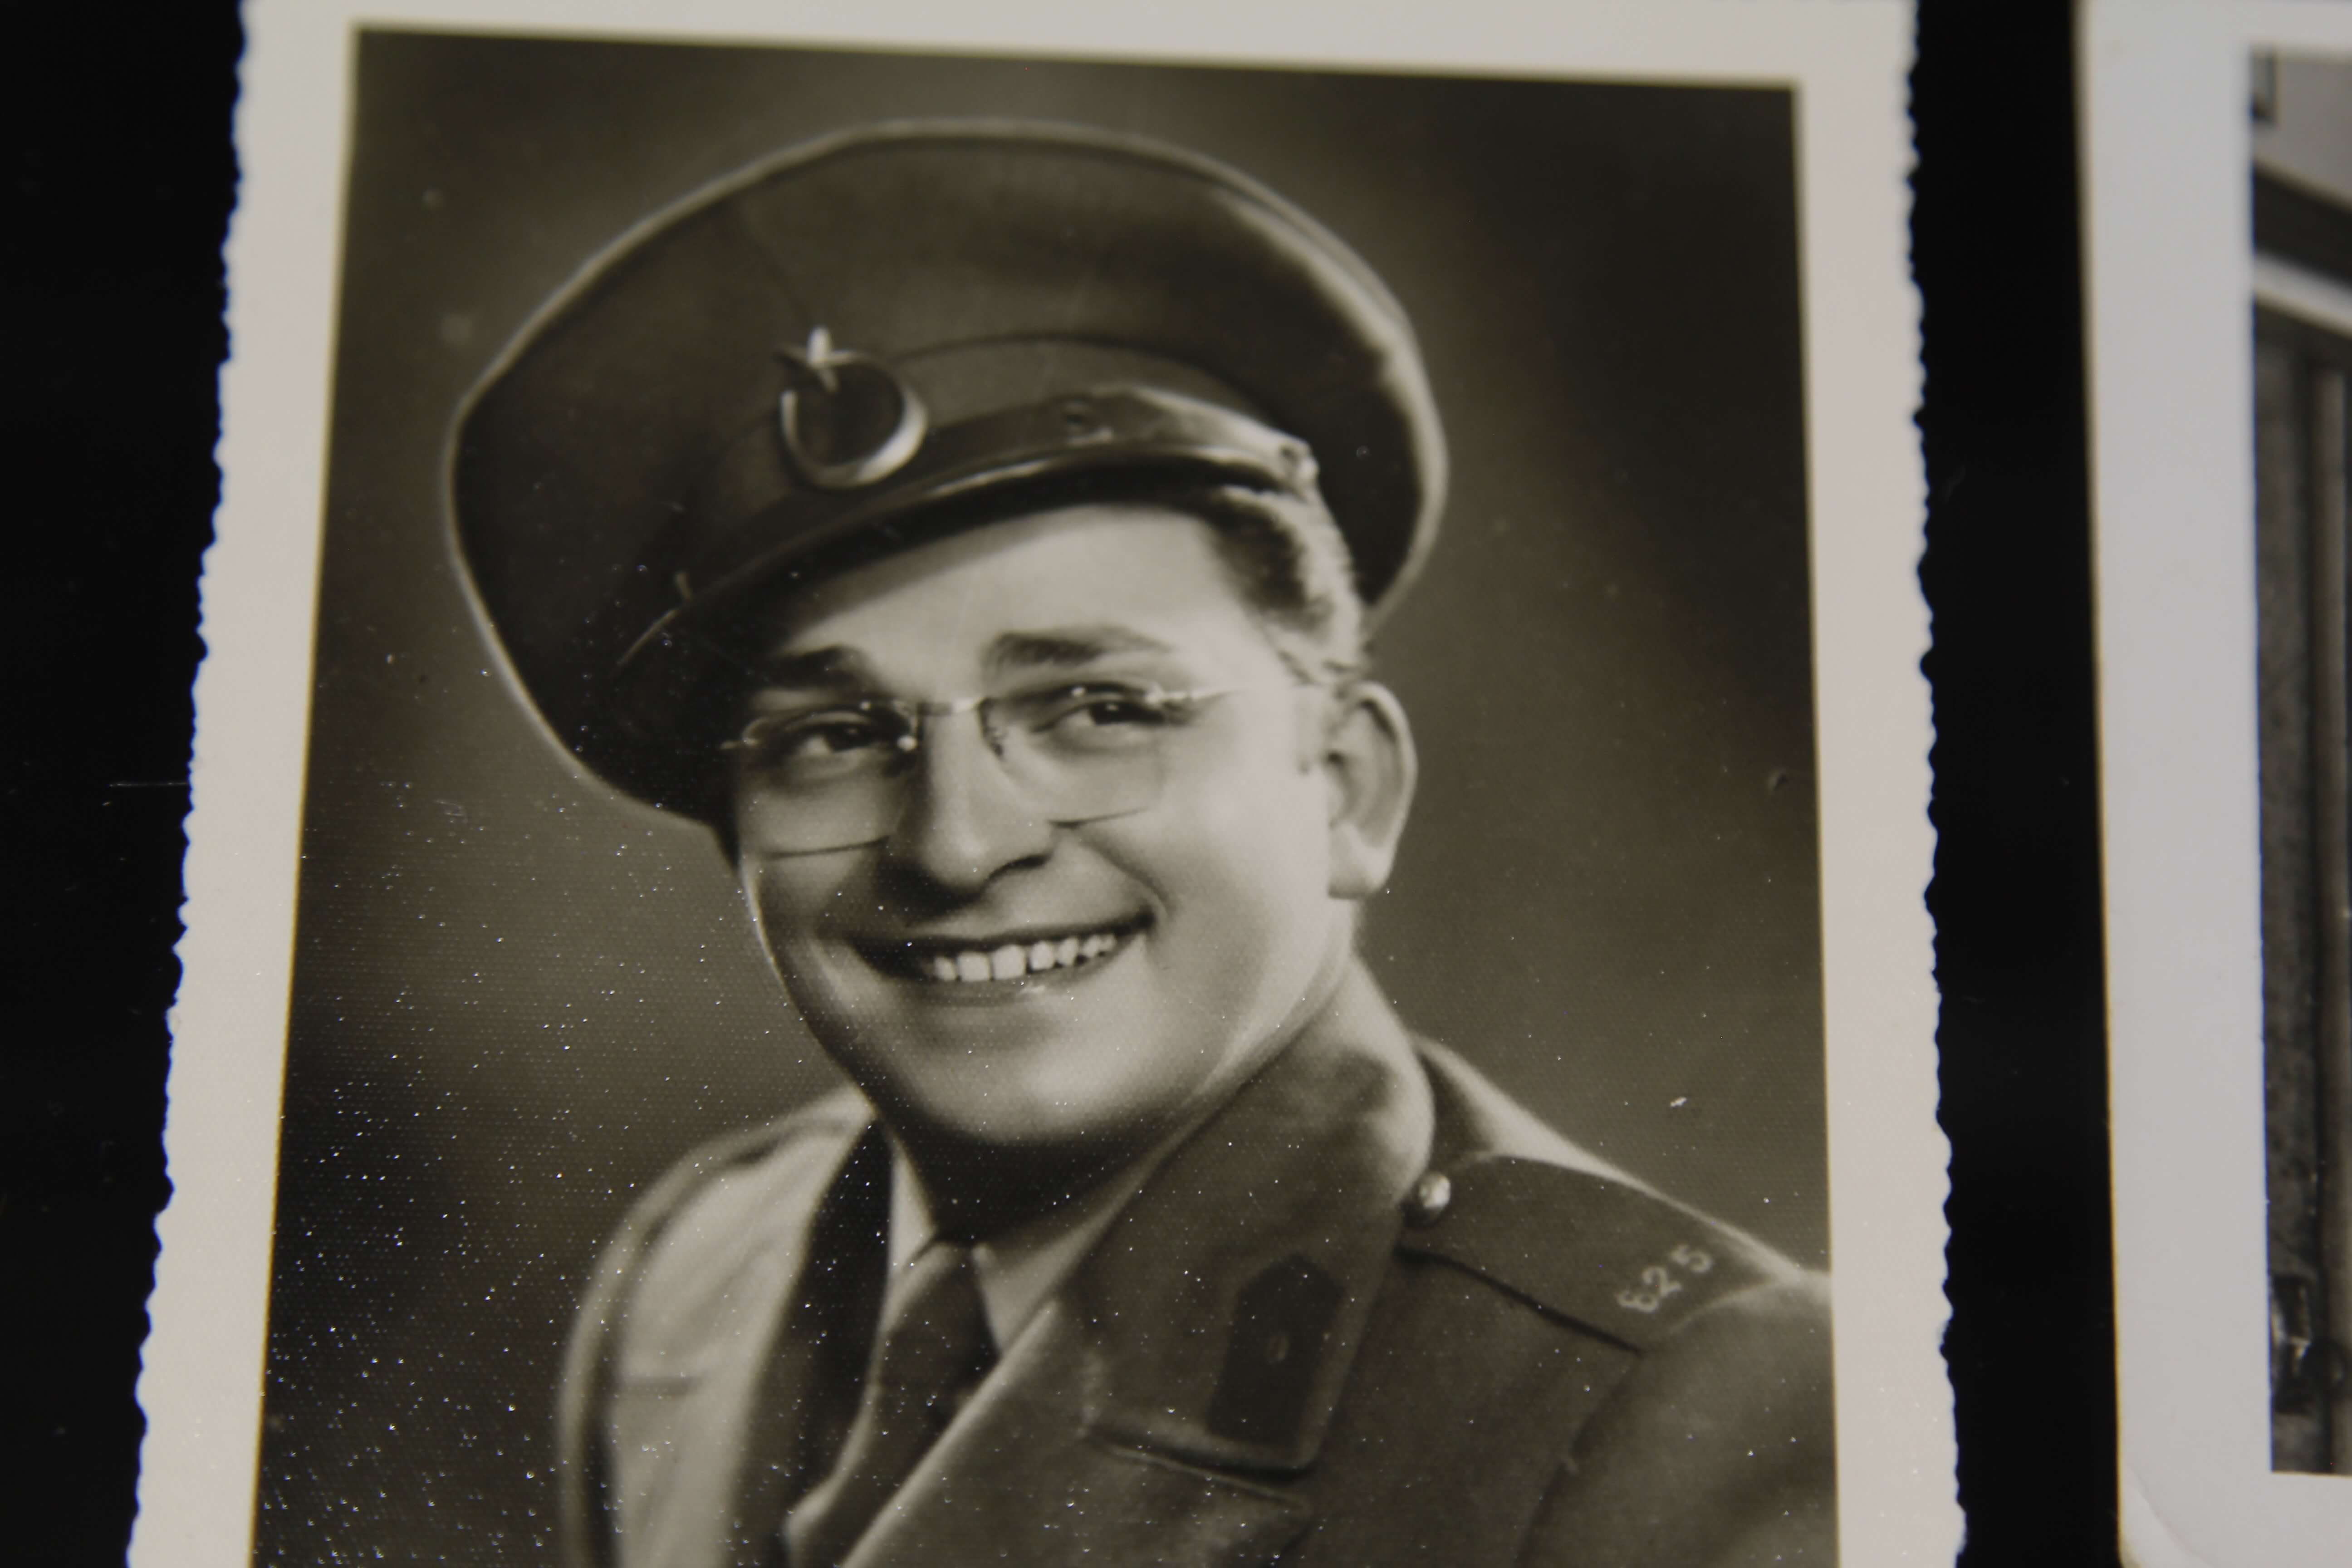 Still from A Prince from Outer Space: Zeki Muren. An old, sepia-toned, photograph of a man wearing glasses and a military uniform, he is smiling and looking off-camera.